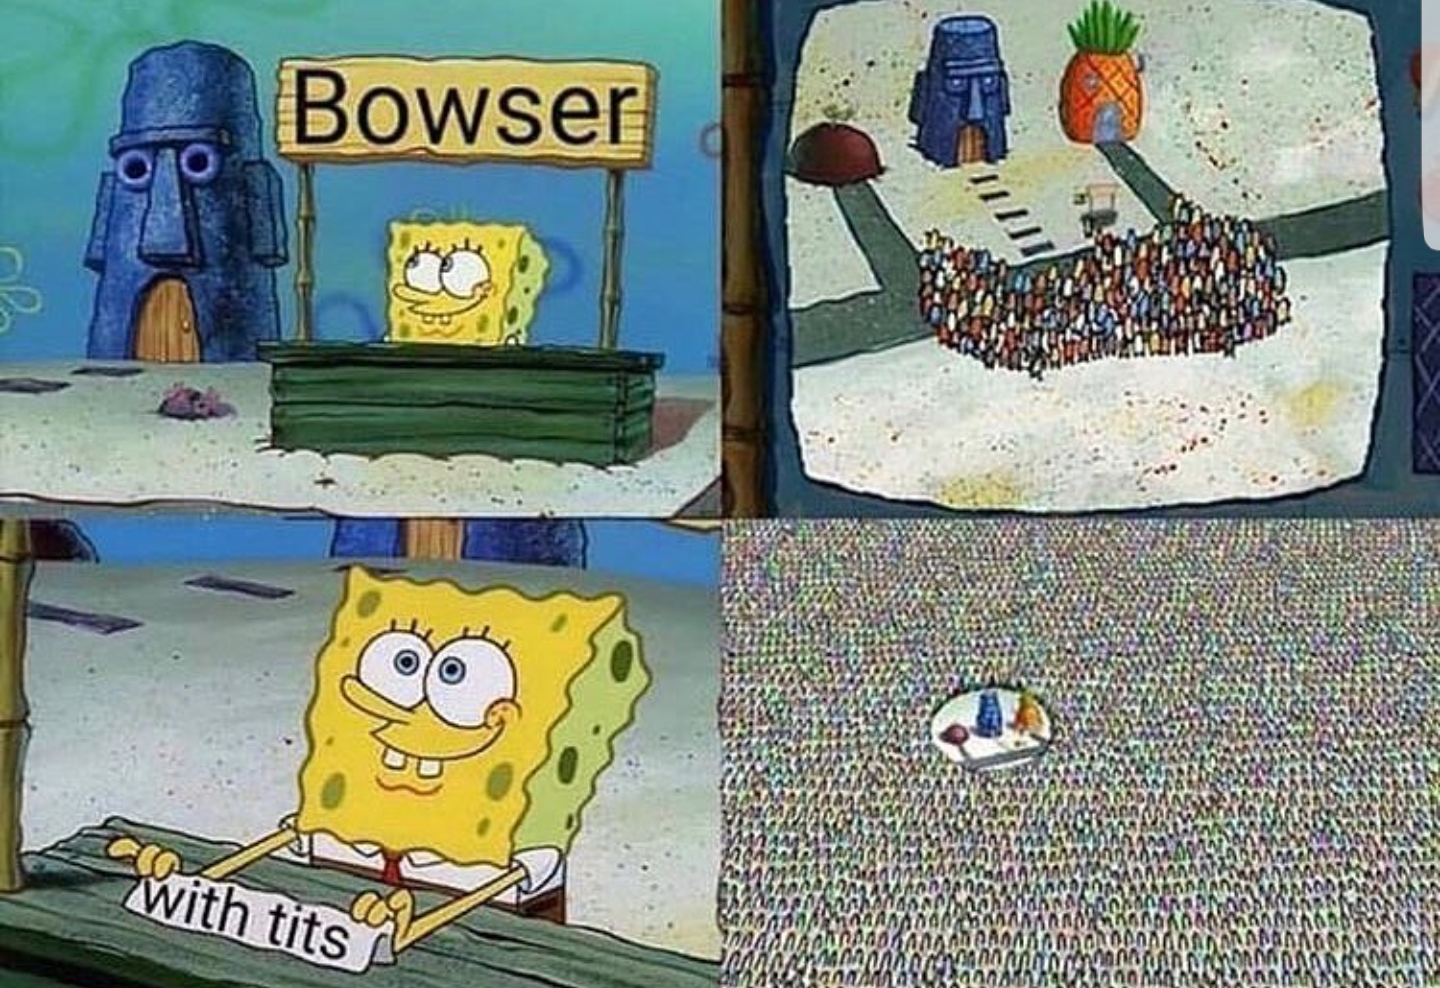 spongebob hype stand meme template - Bowser with tits was the